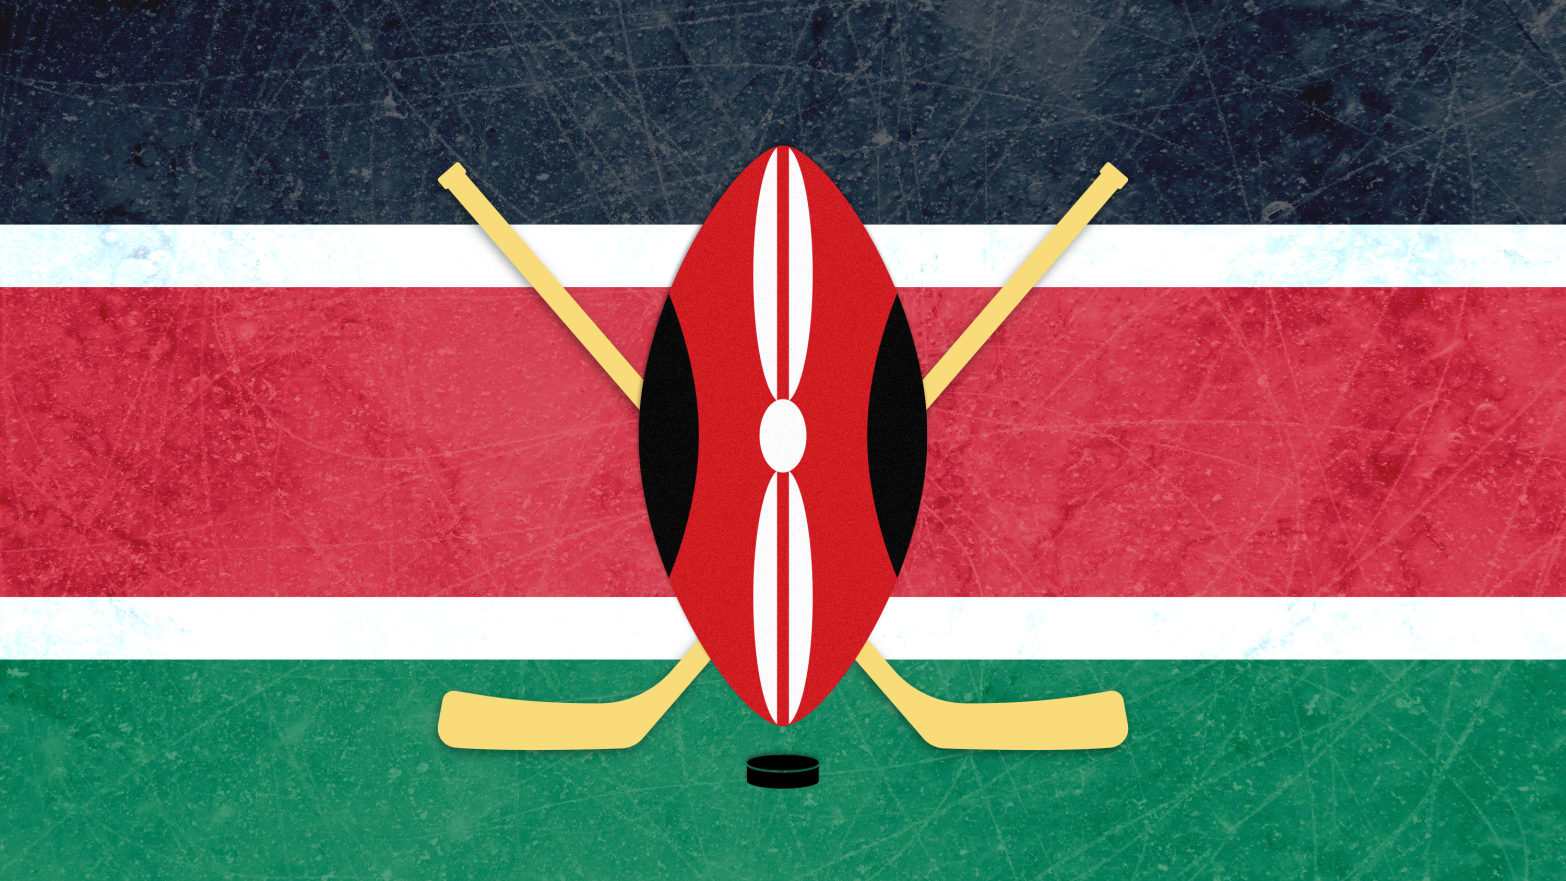 How I Wound Up Traveling to Kenya to Play Ice Hockey